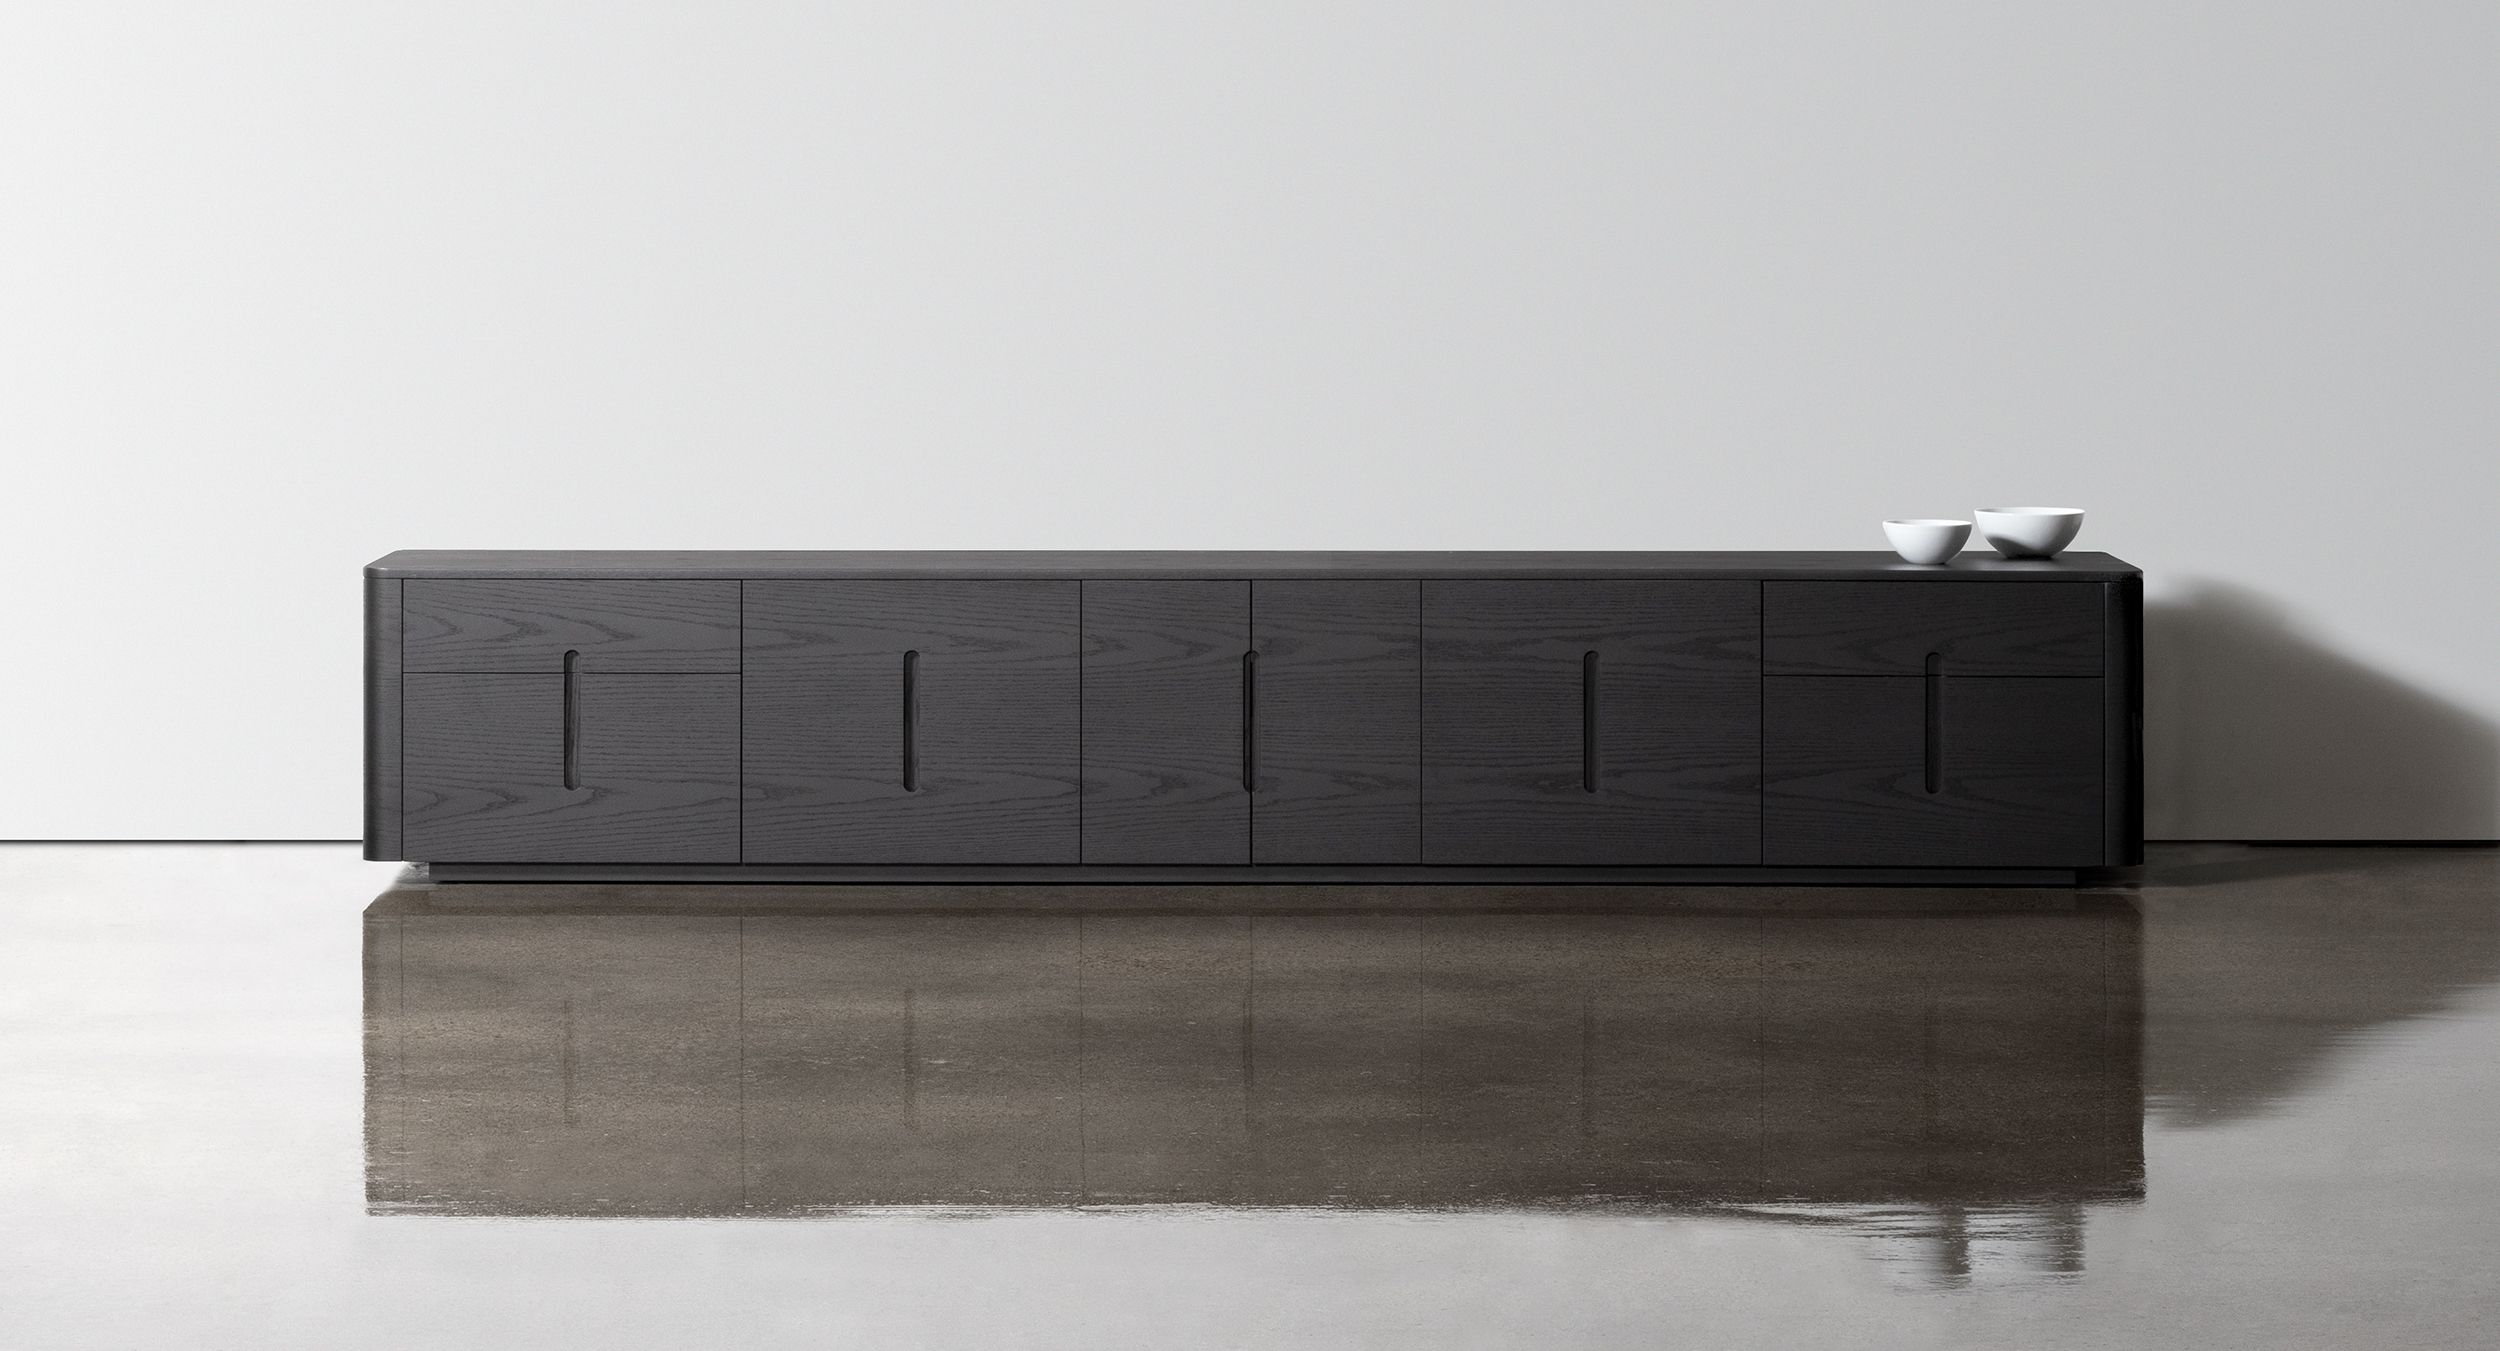 Perfectly grain-matched credenzas can be specified in any wood veneer and finish.